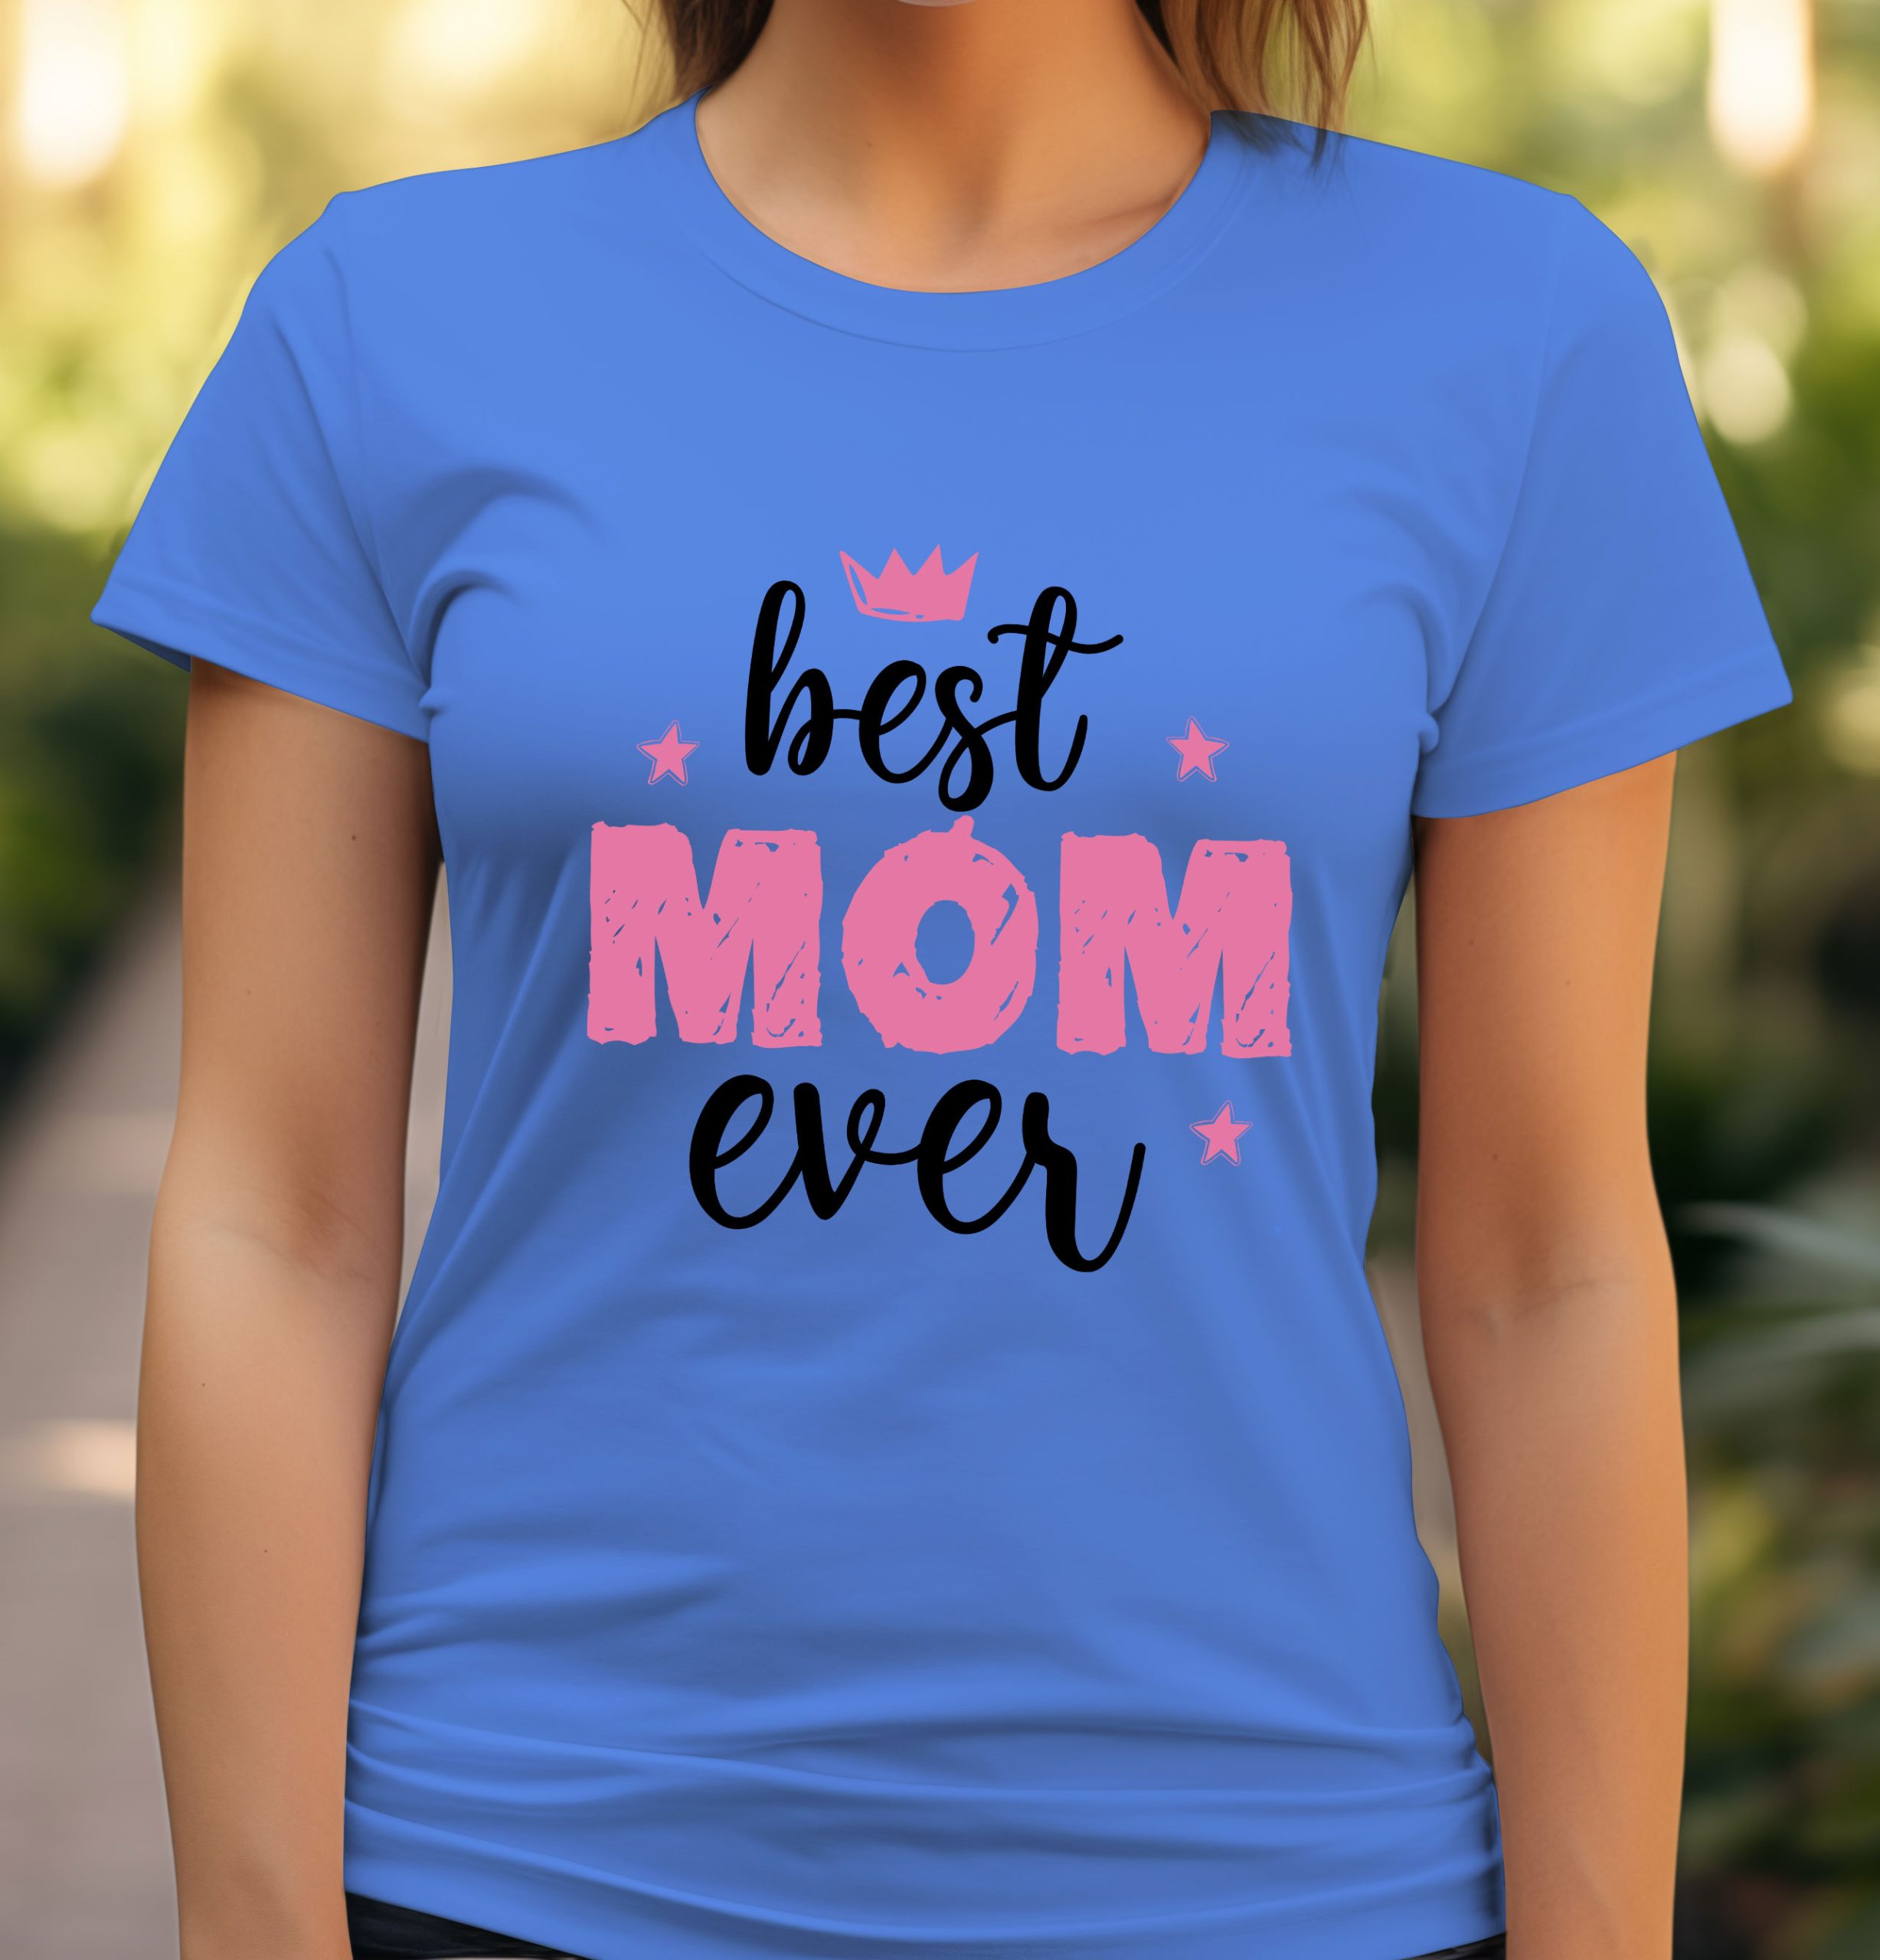 Best Mom Ever T Shirt Printcold